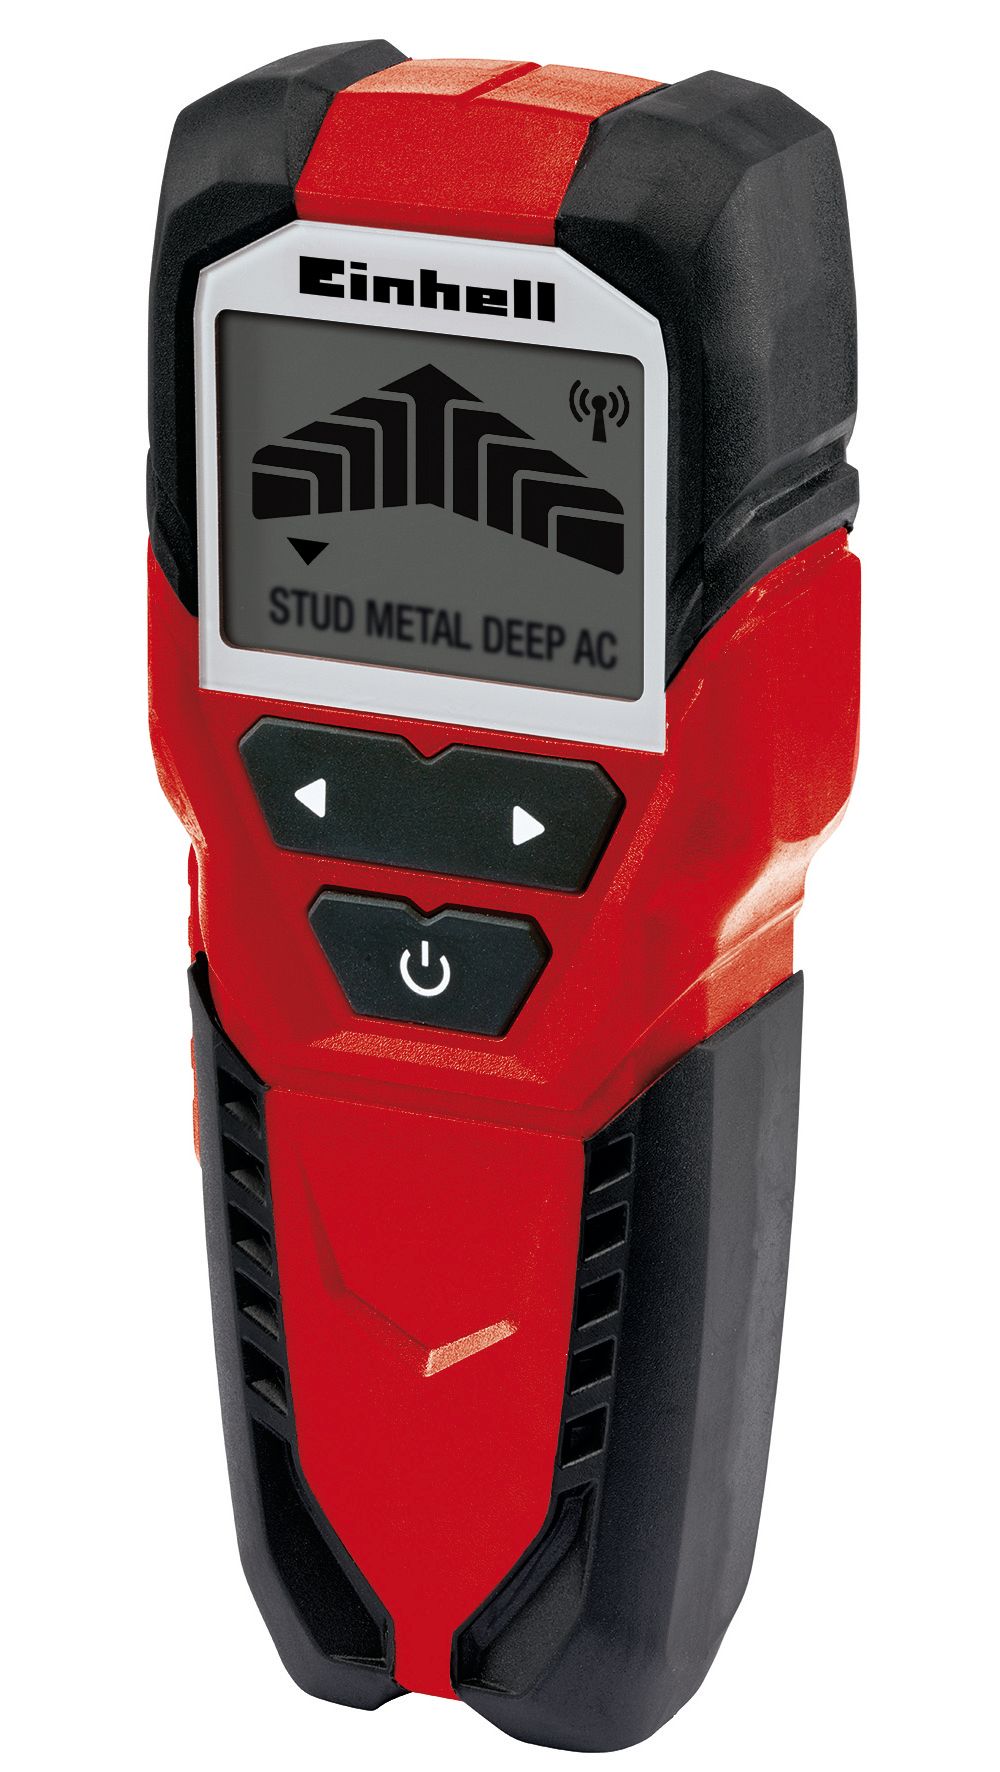 Einhell Tc-md 50 Live Wire, Pipe & Stud Detector